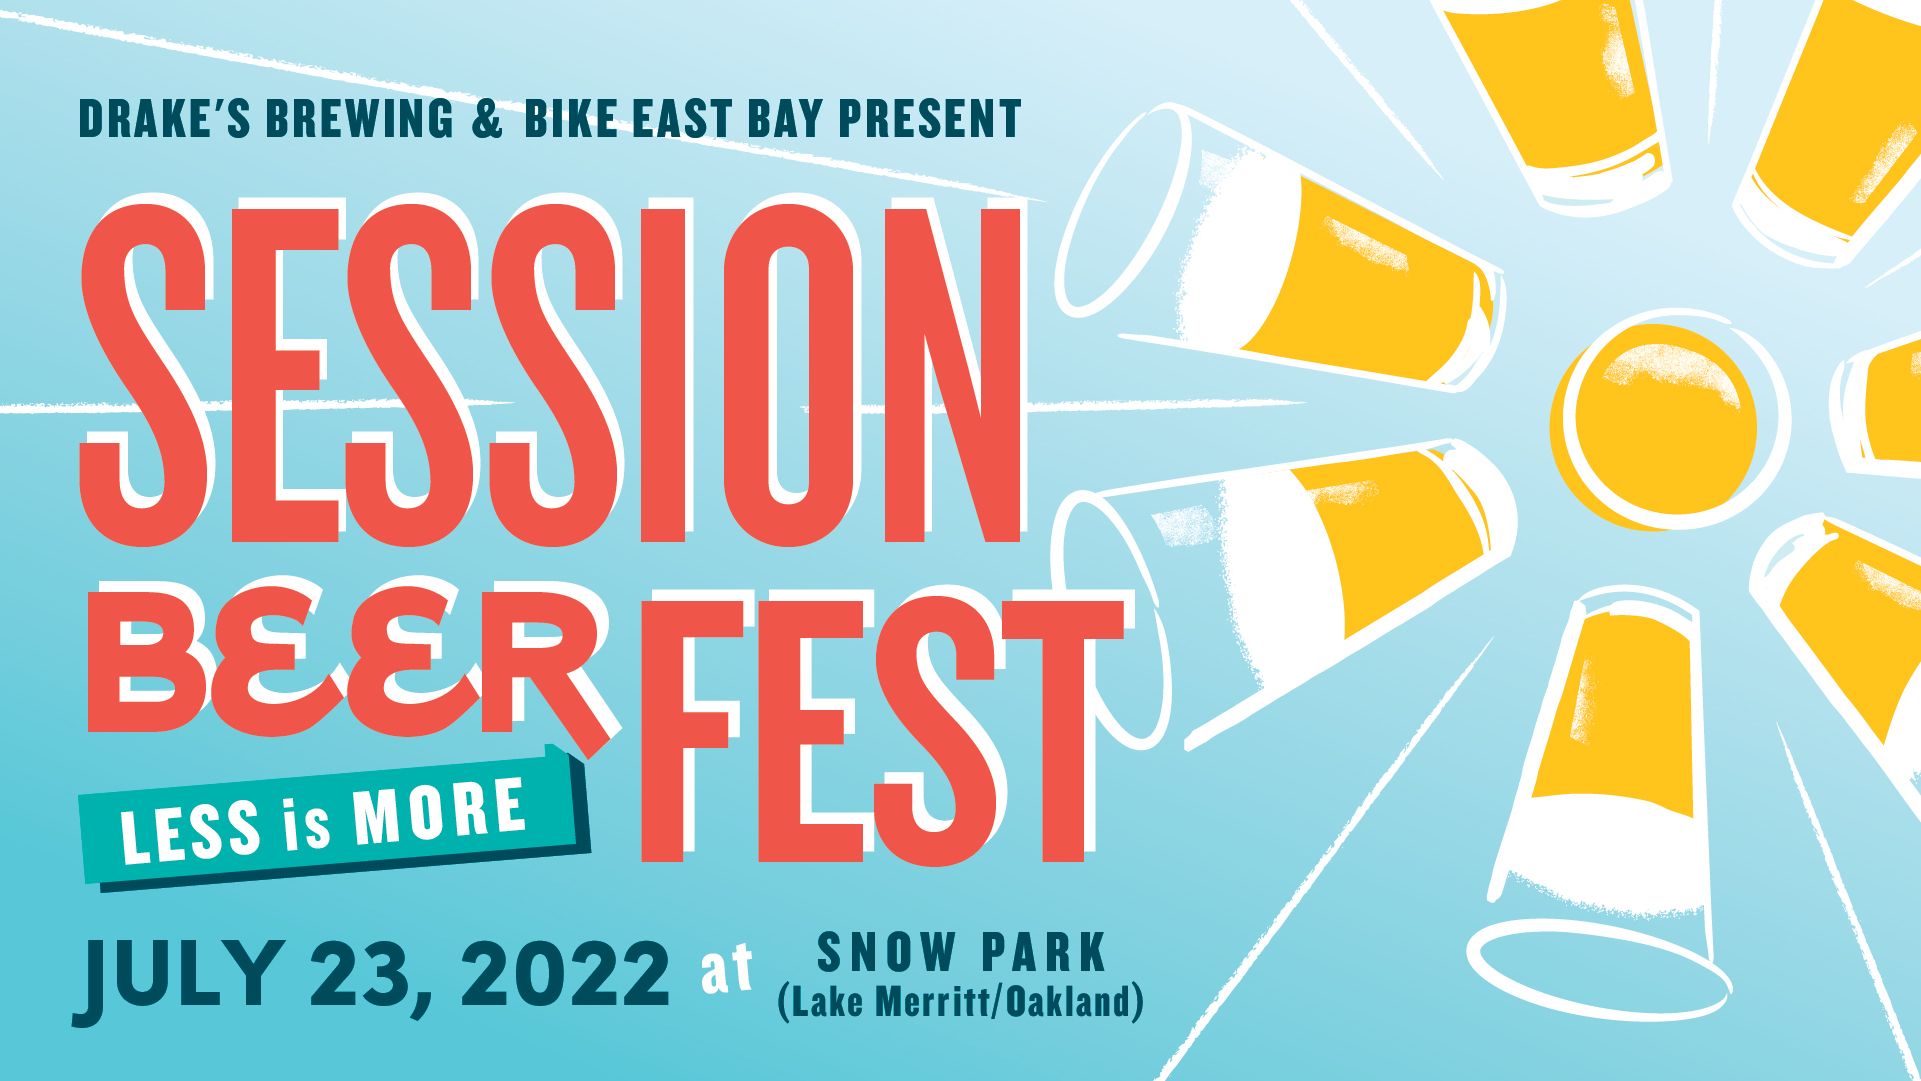 Session Fest is back! Join us for Session Beers & Fun in Oakland